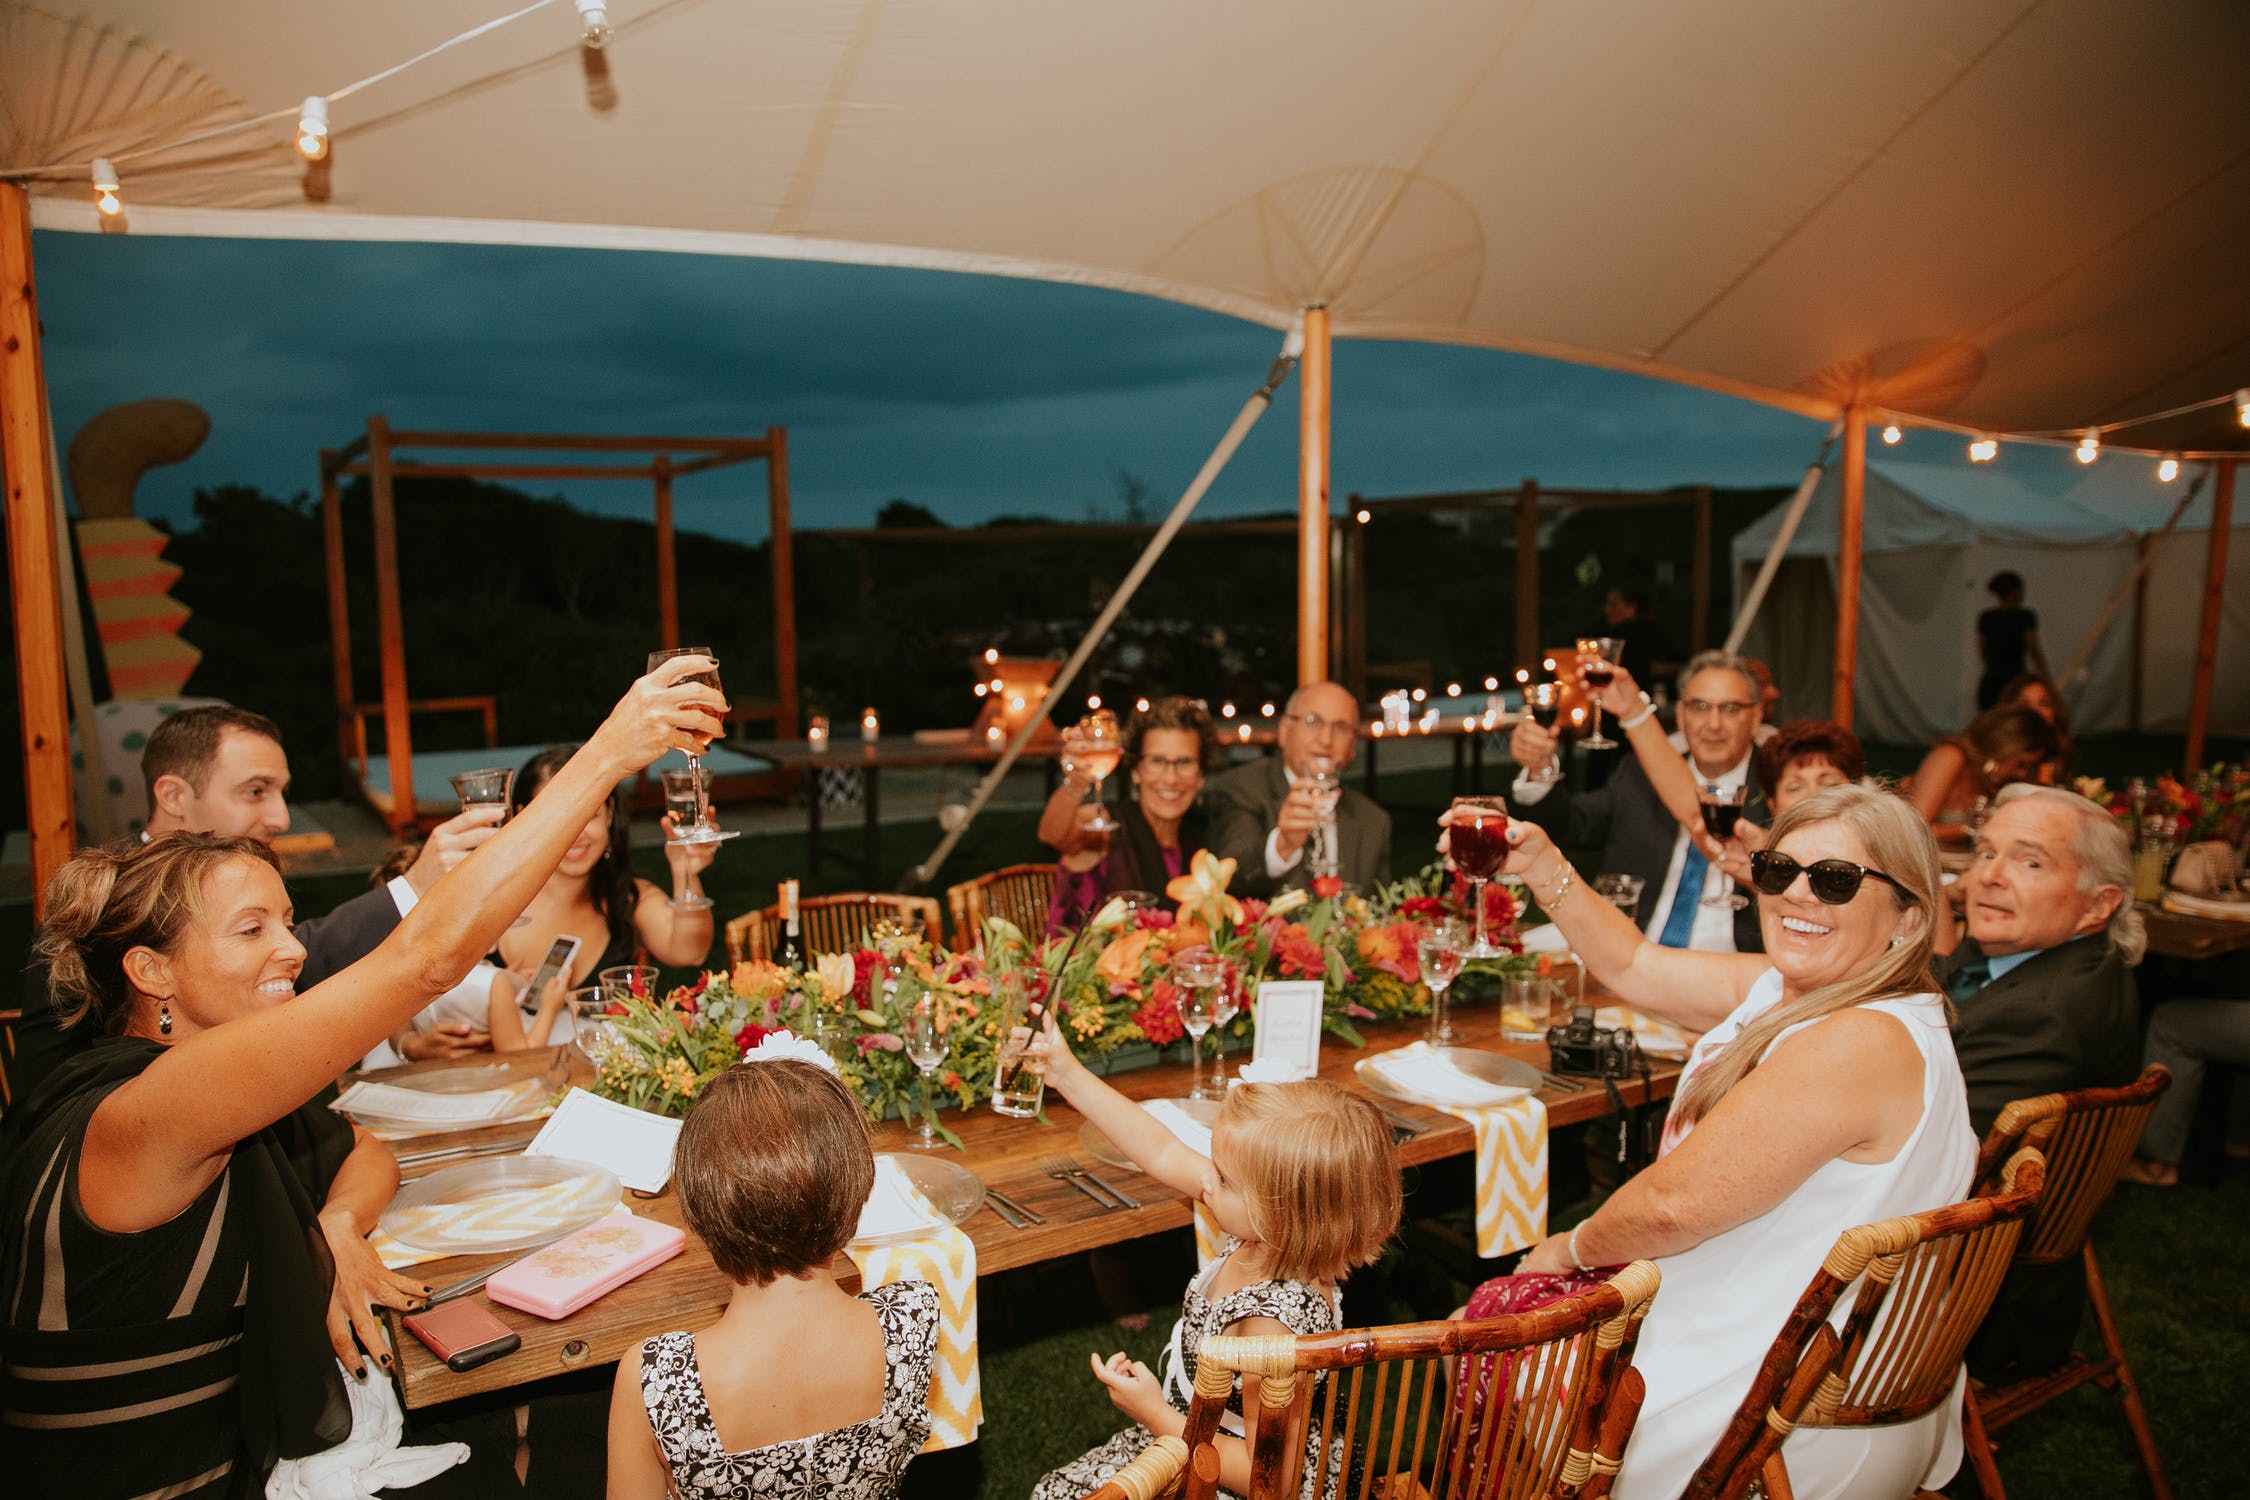 People toasting around a table